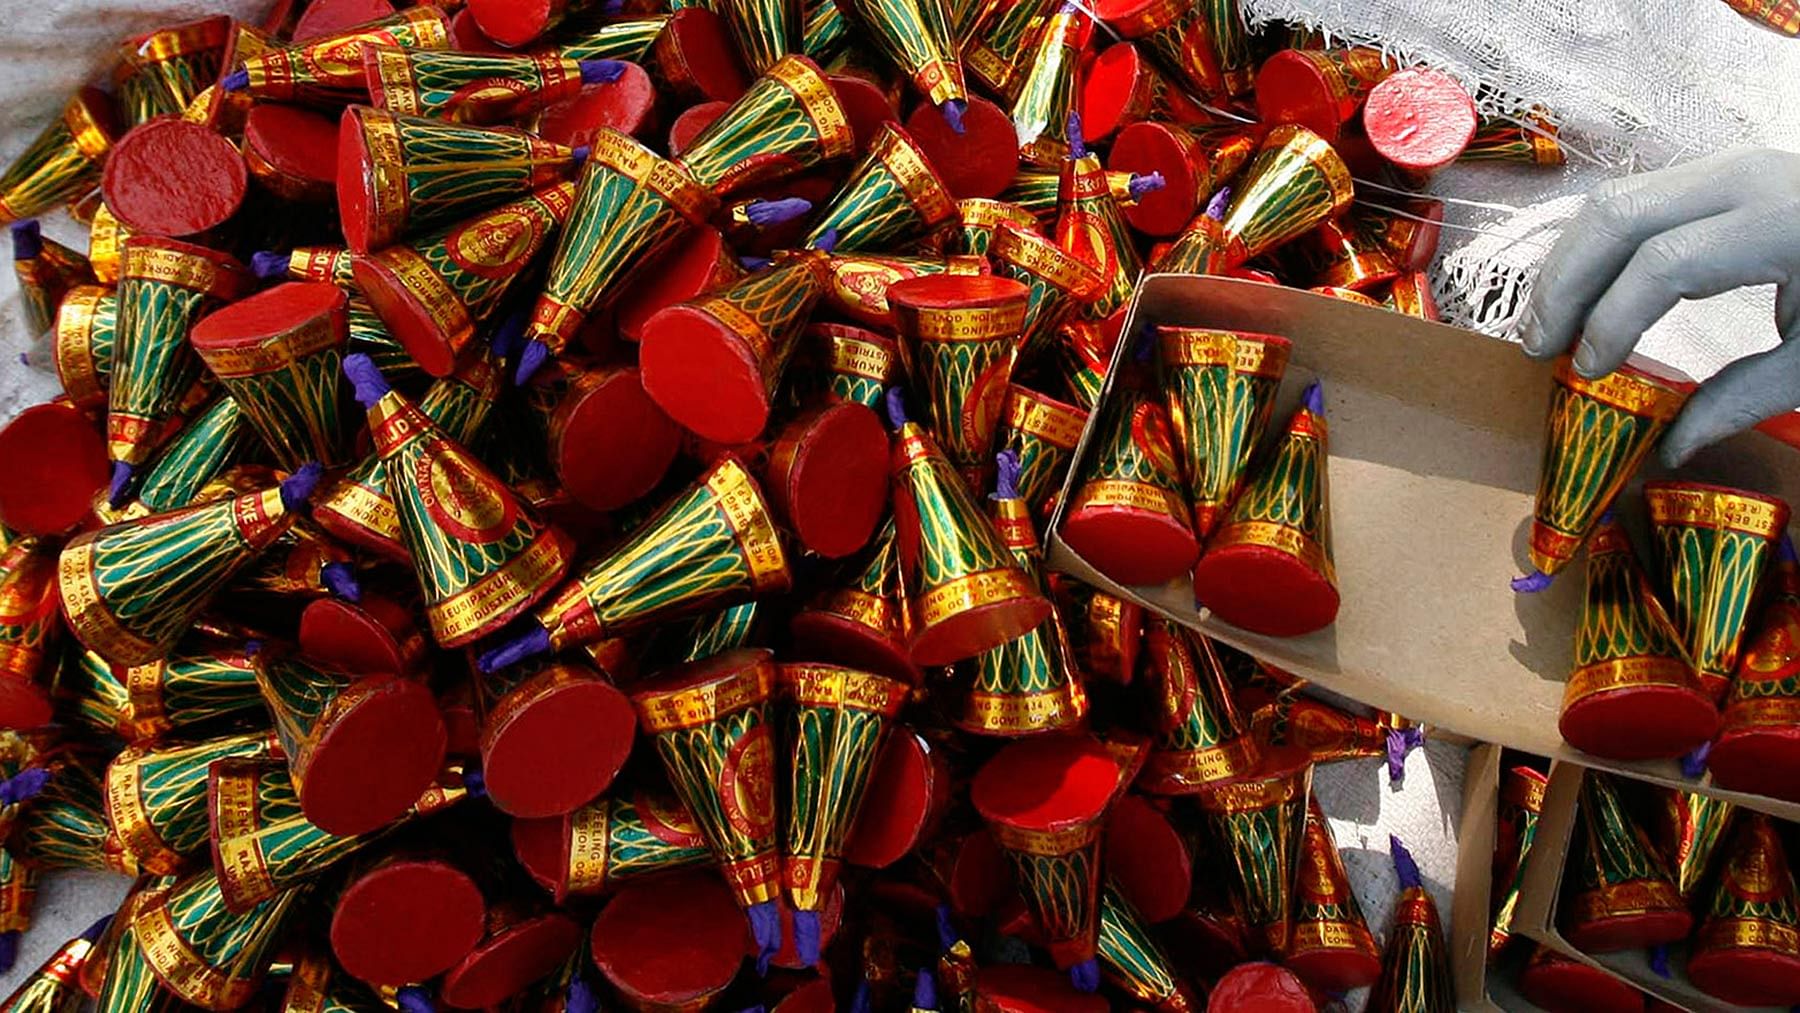 Popular firecrackers like <i>anar</i> (flower-pot) and <i>chakri</i> (spinning firecracker) emit particulate matter 200 to 2,000 times the safe limits as designated by the WHO.&nbsp;